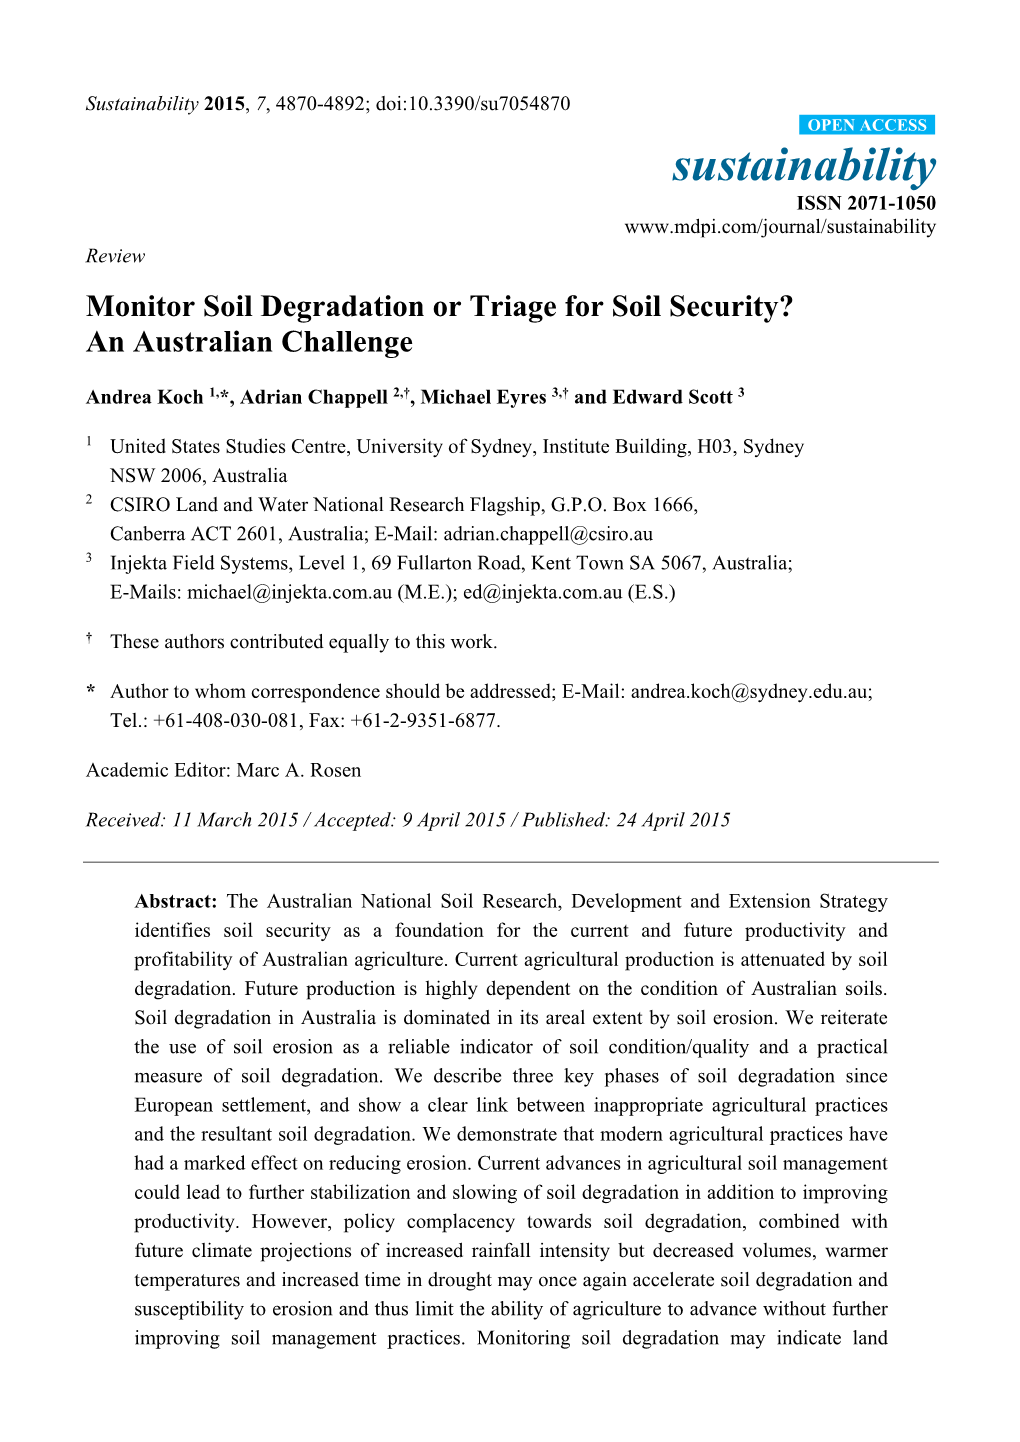 Monitor Soil Degradation Or Triage for Soil Security an Australian Challenge